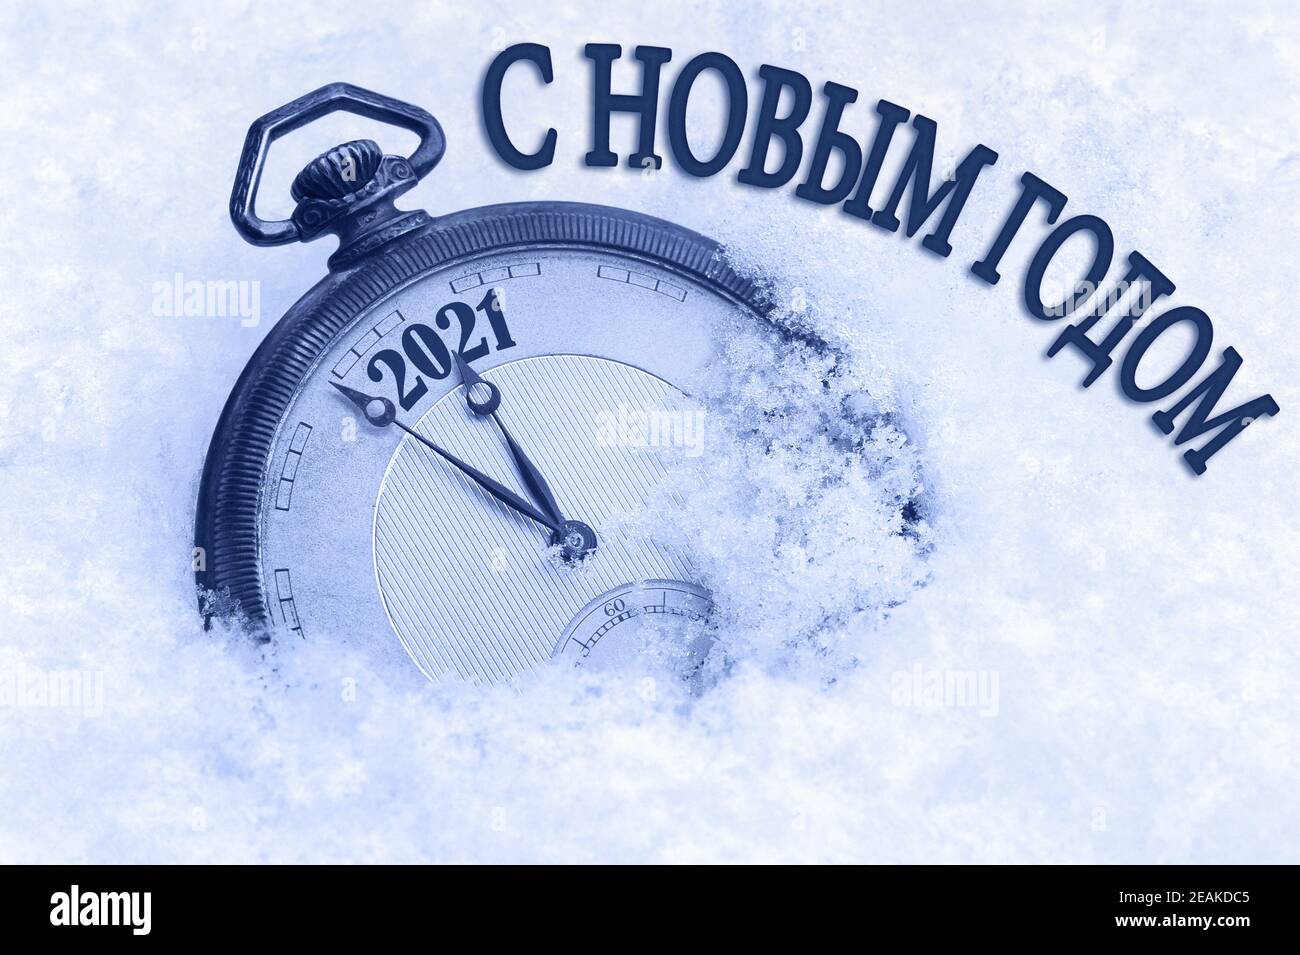 2021 new year card, Happy New Year greeting in Russian language, pocket watch in snow, countdown to midnight Stock Photo